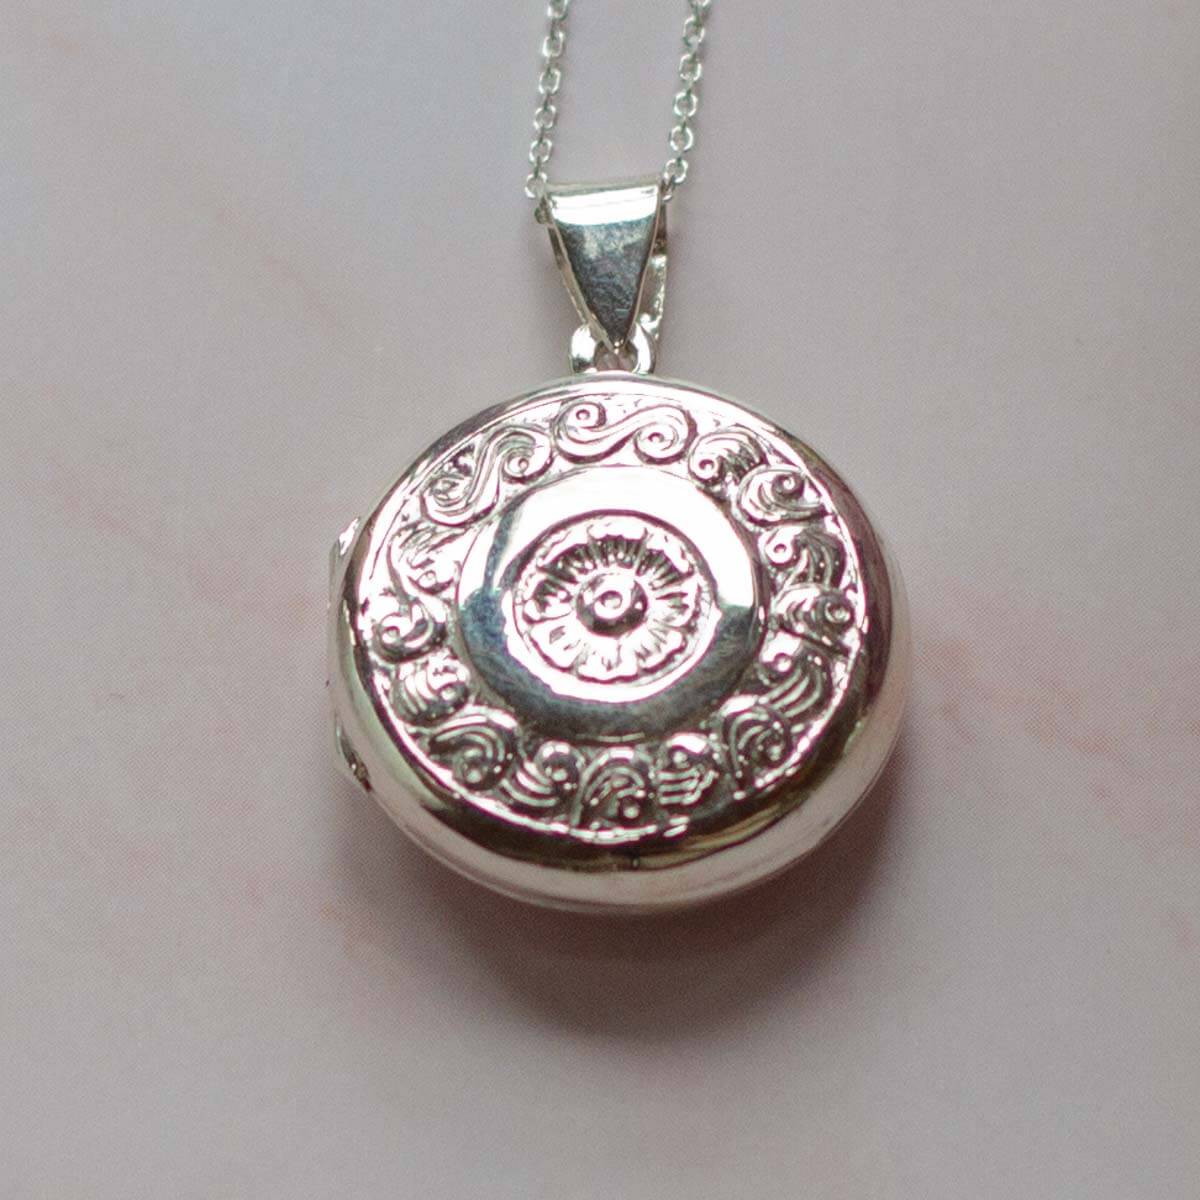 Large silver locket, round in shape on a pale pink background.